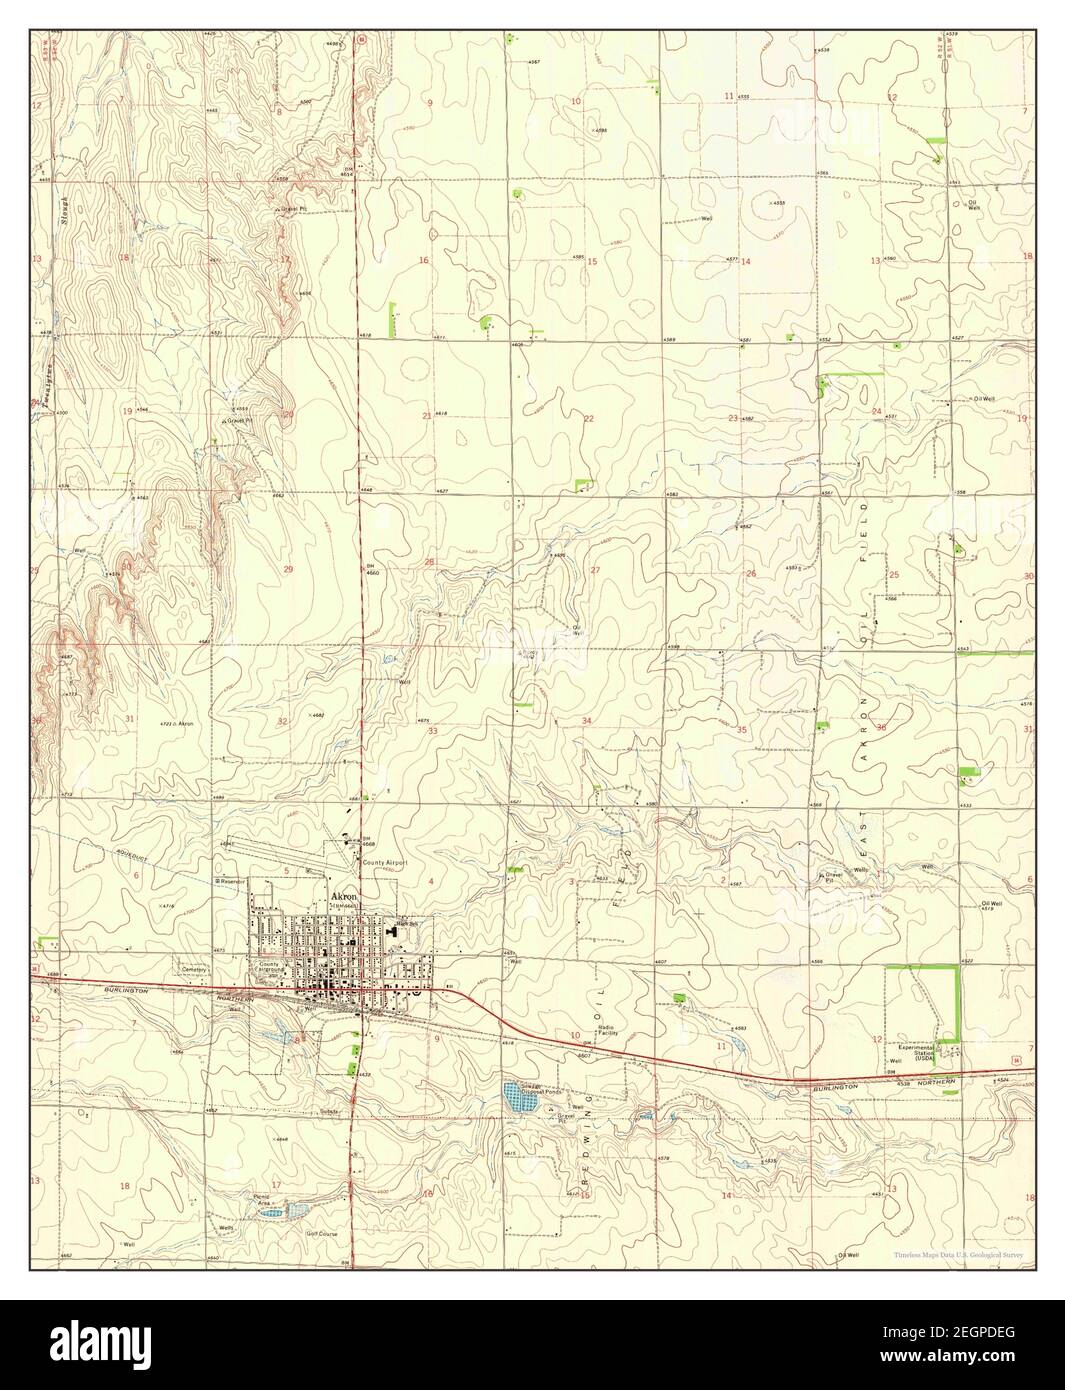 Akron, Colorado, map 1973, 1:24000, United States of America by Timeless Maps, data U.S. Geological Survey Stock Photo